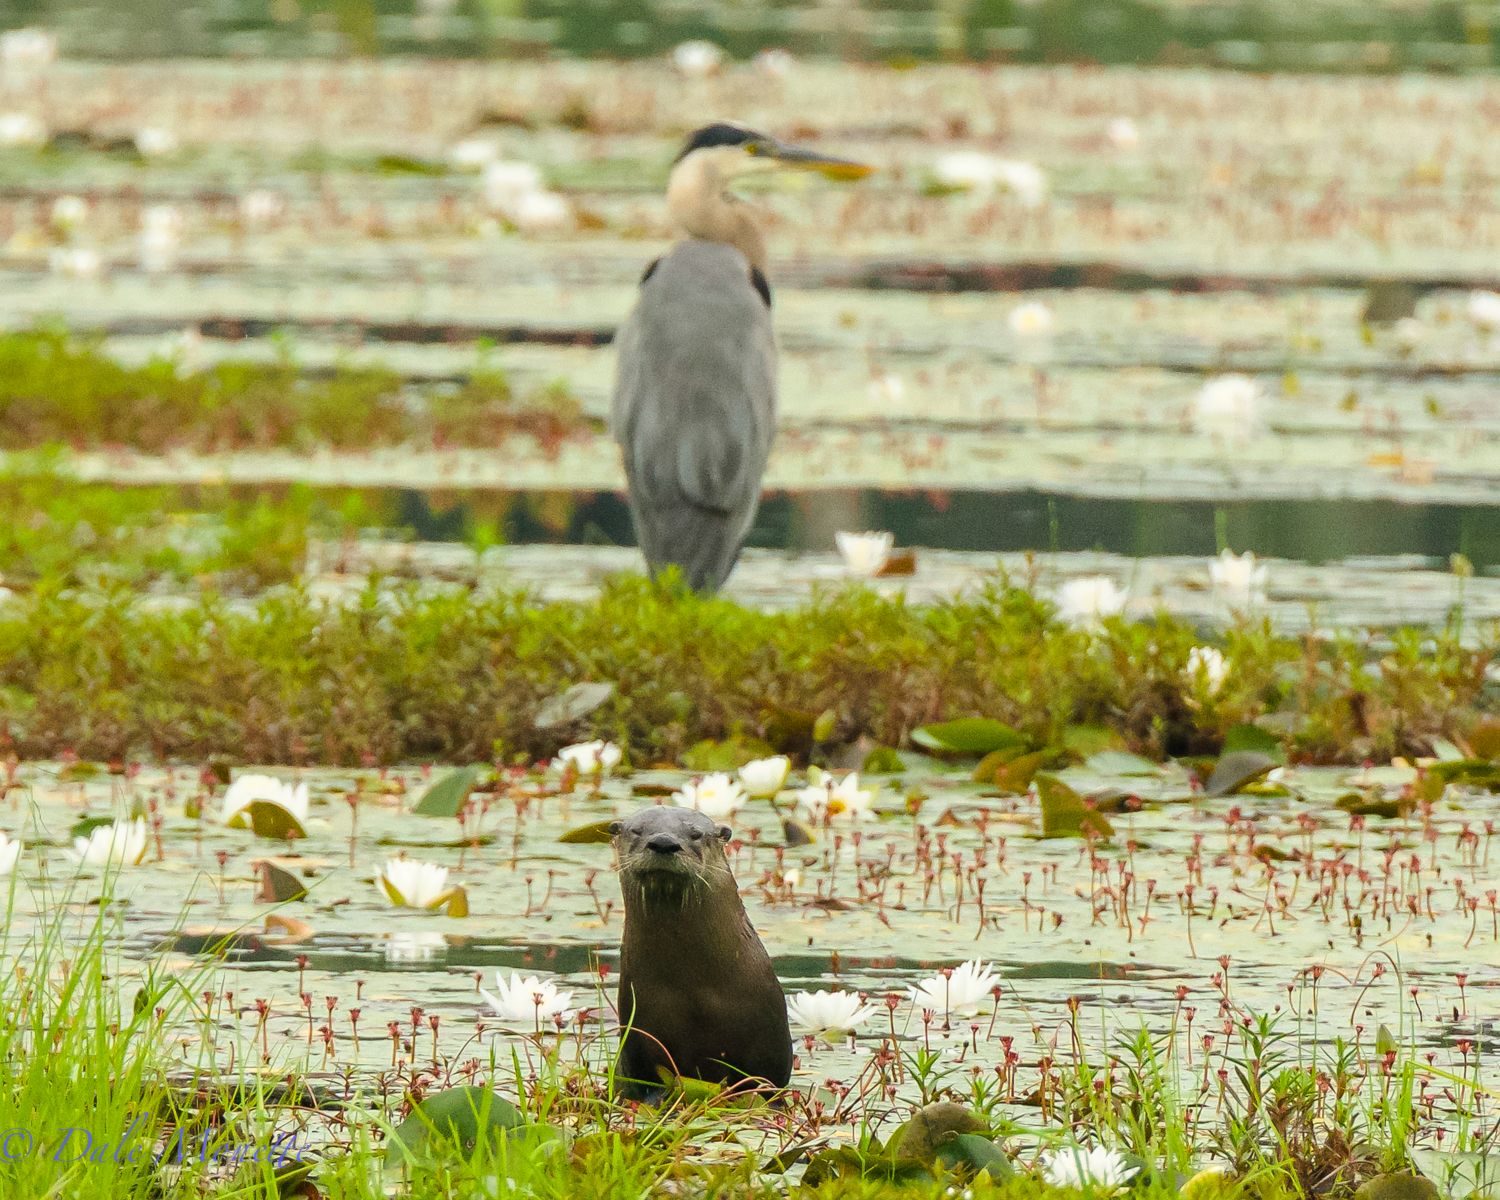   As I was watching this heron sitting on a mud &nbsp;and weedy patch in a swamp this otter popped up right in my viewfinder of the camera as I was looking at the heron !! &nbsp; That will NEVER happen again to me.  